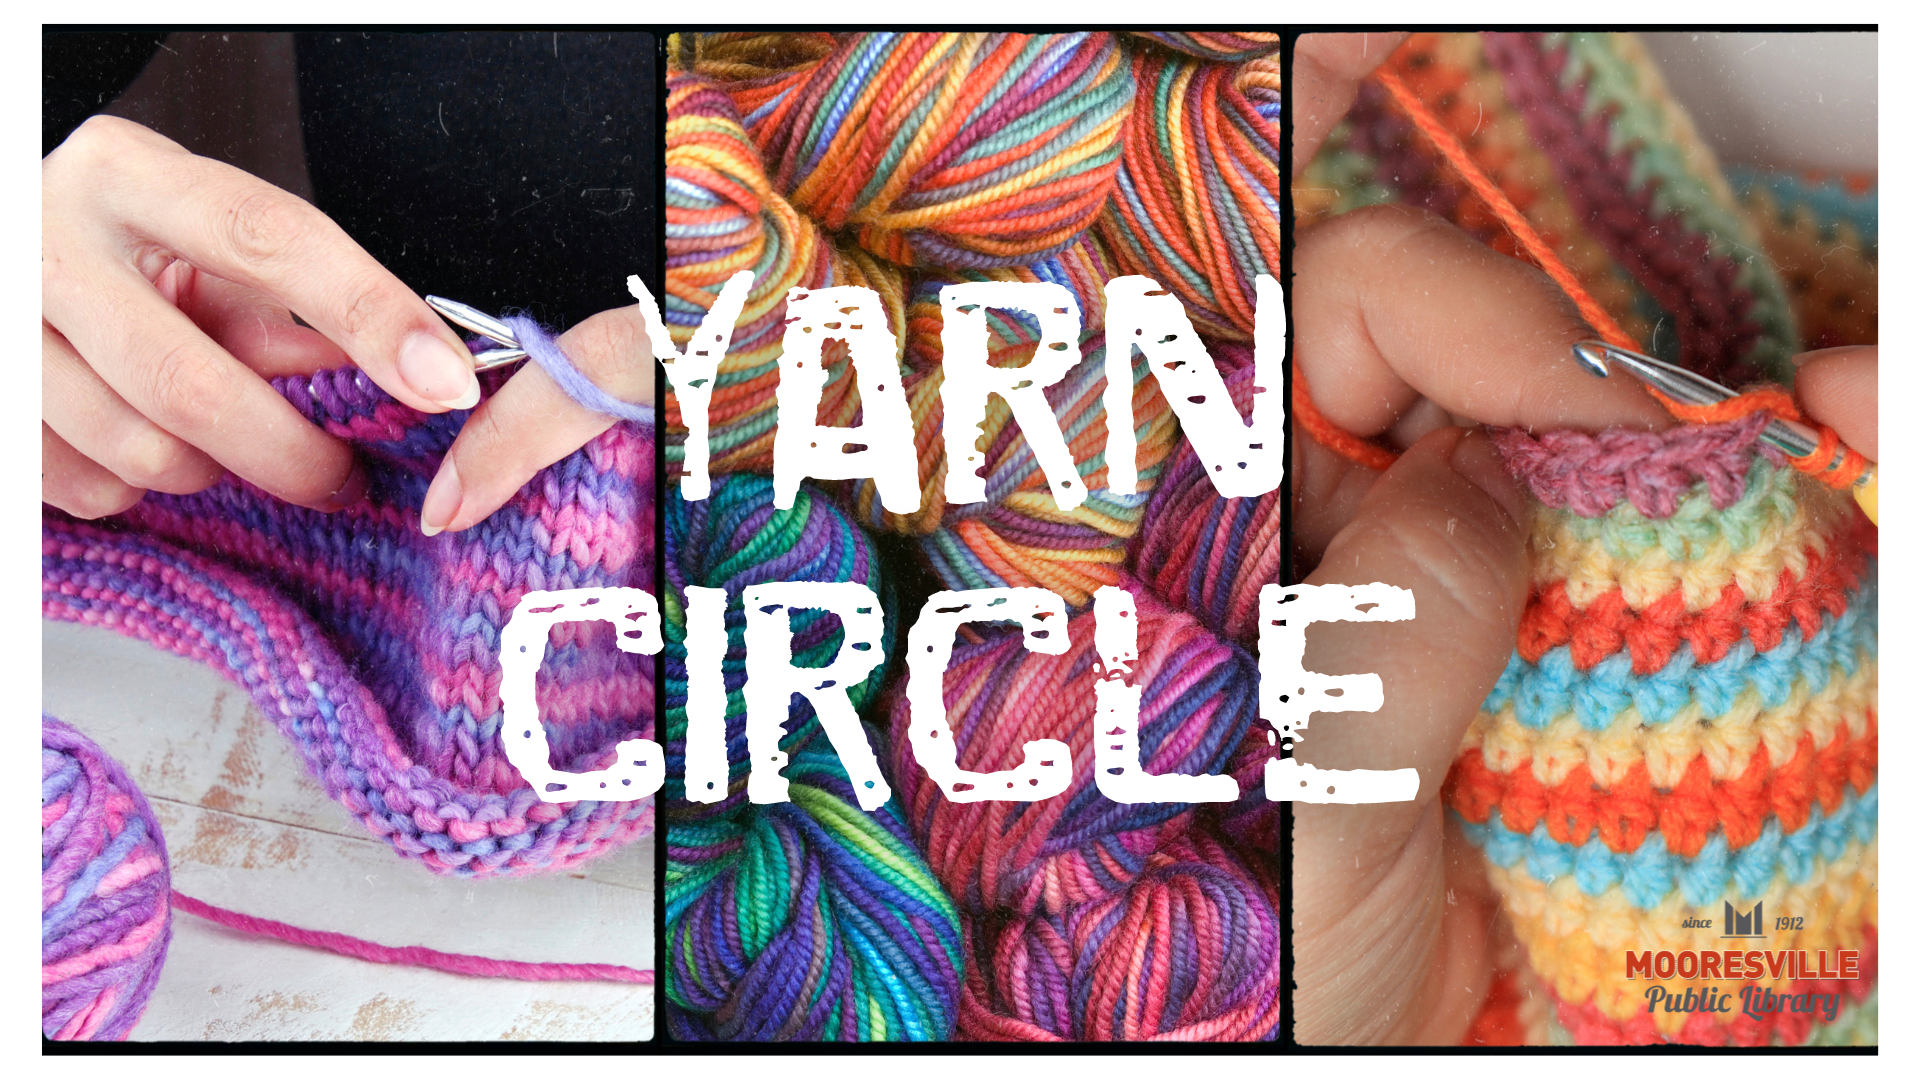 White distressed text reads "Yarn Circle" over images of hands knitting, multiple yarn skeins, and hands crocheting